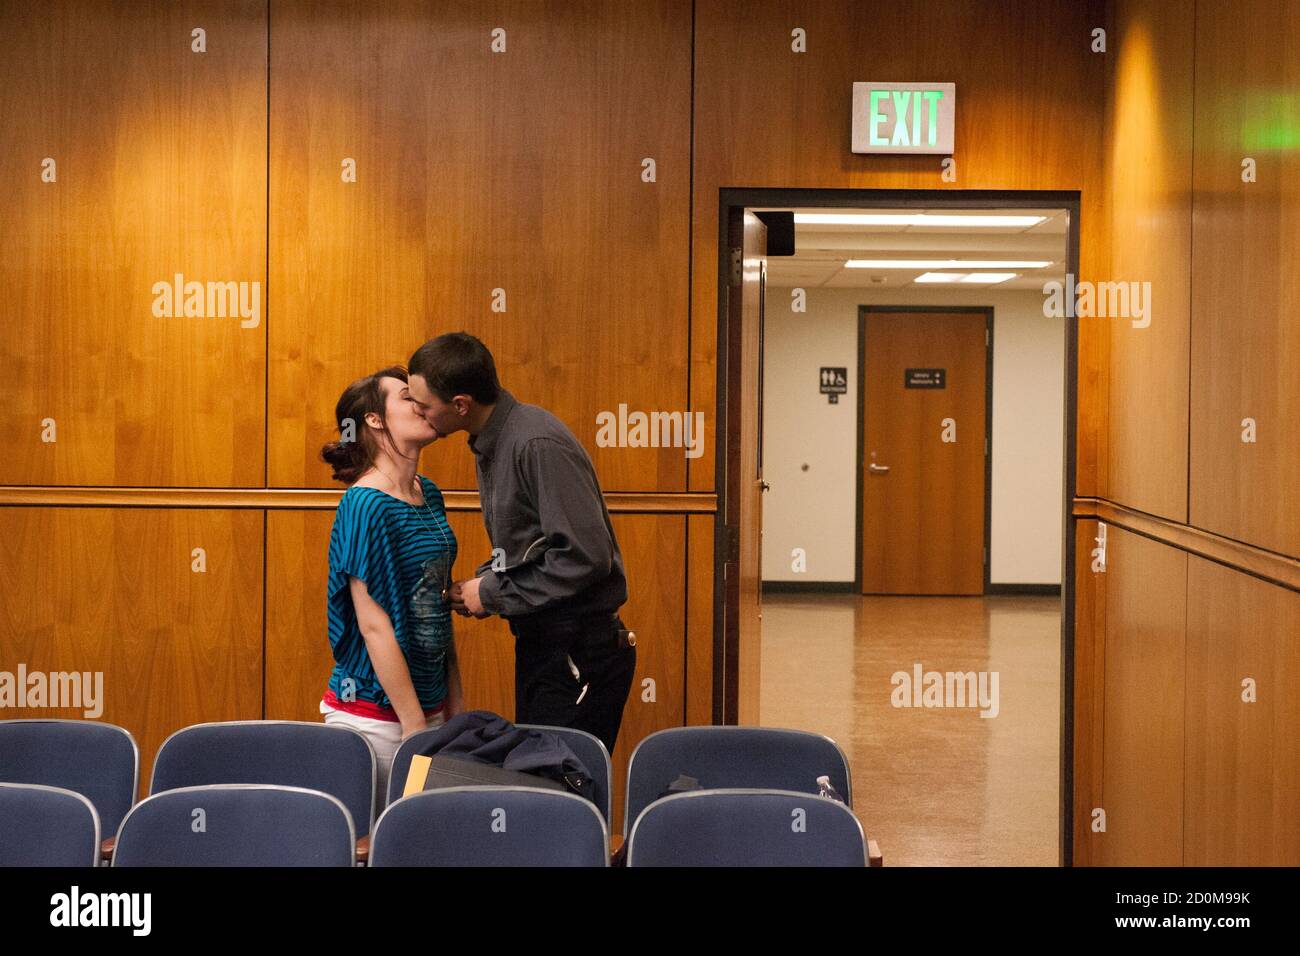 Terra Green (R) and Jeff Williamson (L) kiss after being married at the Williams County courthouse in Williston, North Dakota February 6, 2015. Later the same day, Green took a bus back to Oregon, where she is from. Green and Williamson travelled to Williston with a friend, Bazileo Hernandez, in search of work. After trying unsuccessfully for over a month to find work, the friends decided to leave Williston.   REUTERS/Andrew Cullen   (UNITED STATES - Tags: BUSINESS COMMODITIES EMPLOYMENT SOCIETY)  PICTURE 22 OF 28 FOR WIDER IMAGE STORY 'IN PURSUIT OF THE AMERICAN DREAM'  SEARCH 'CULLEN DREAM'  Stock Photo